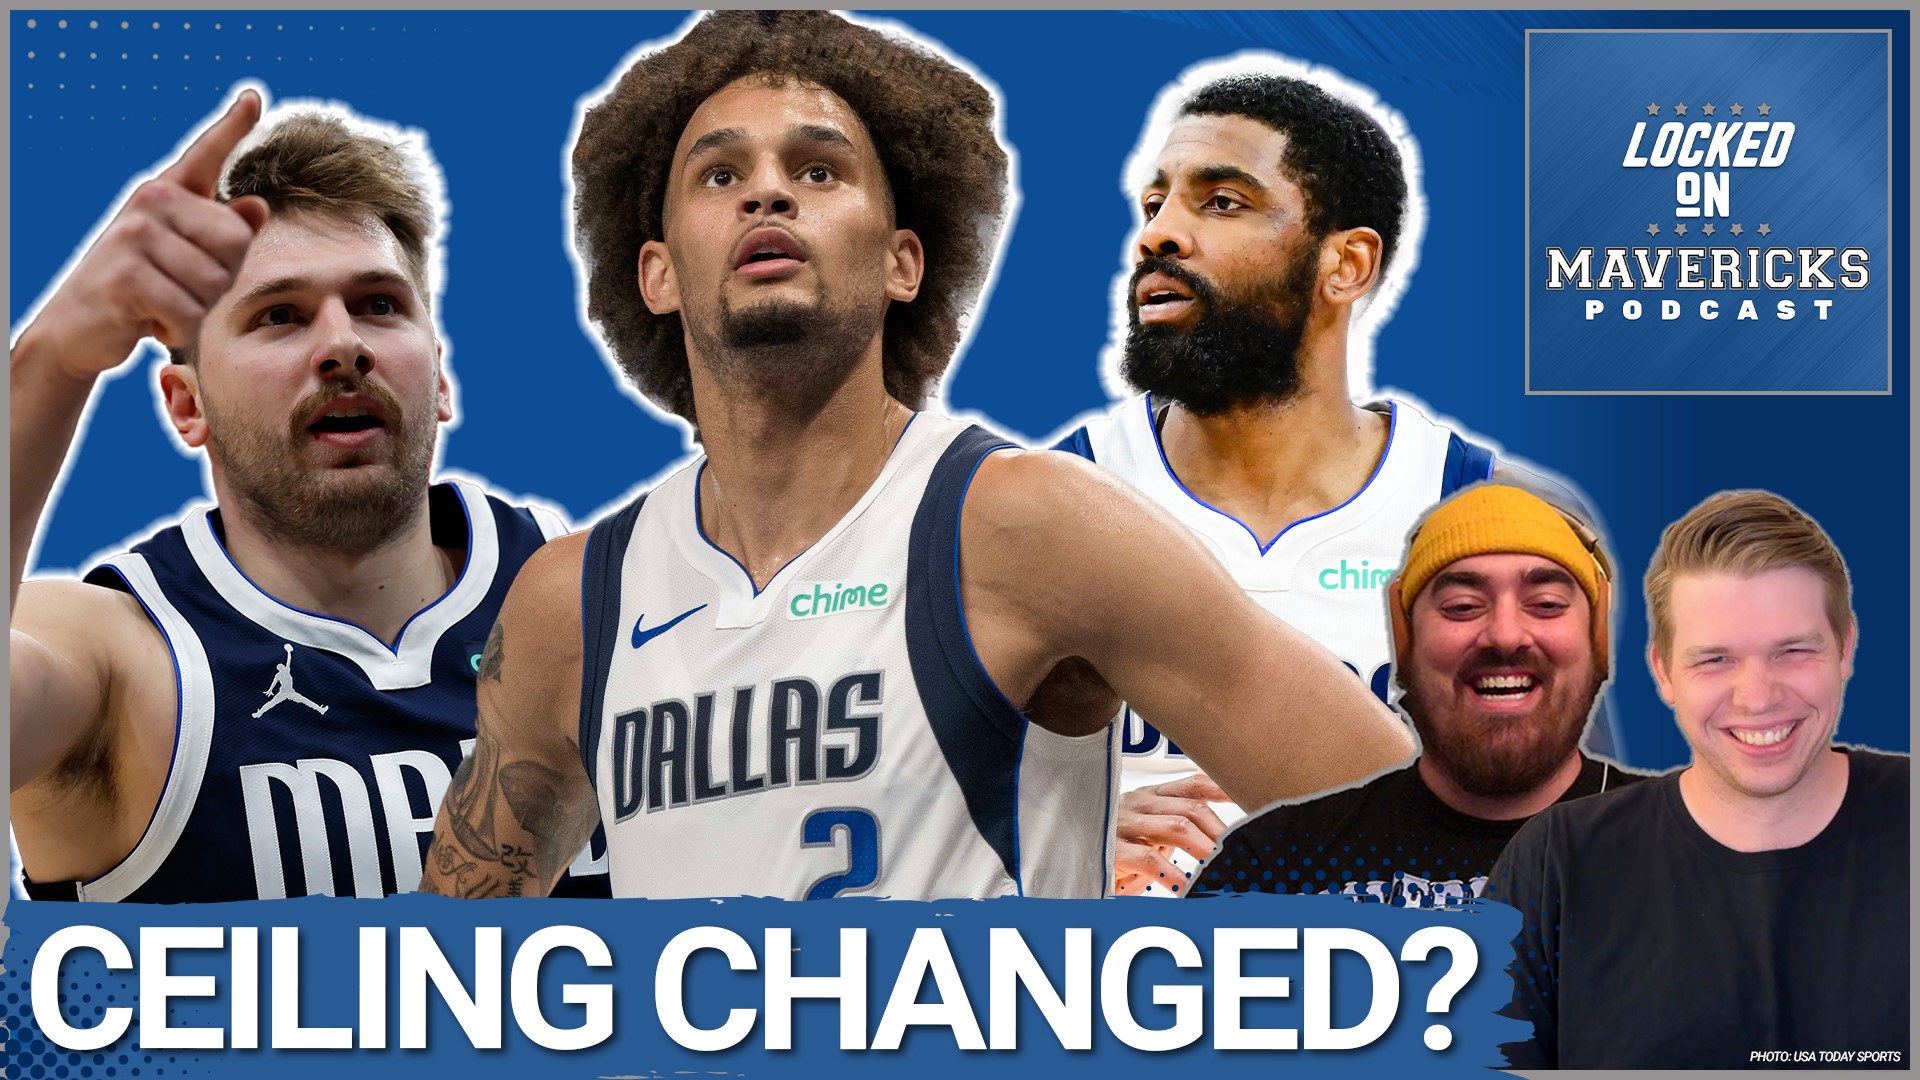 Nick Angstadt and Isaac Harris reunite to discuss Luka Doncic, Kyrie Irving, Dereck Lively II, and the Dallas Maverick